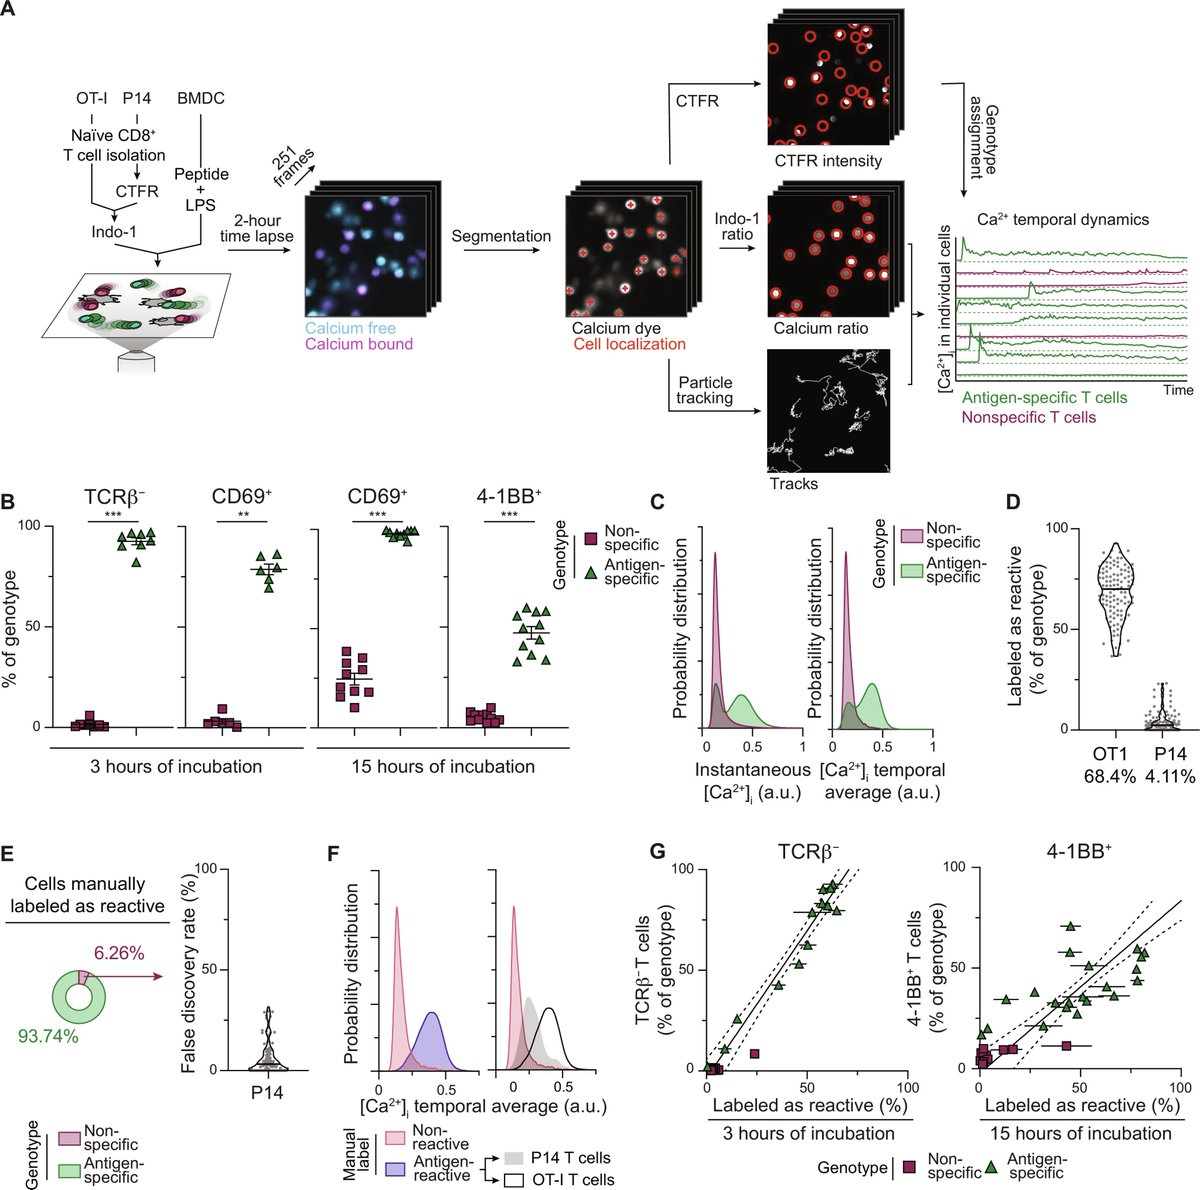 Artificial intelligence-assisted analysis of intracellular calcium dynamics allows for the rapid prediction of T cell specificity @ScienceAdvances @MelicharLab science.org/doi/10.1126/sc…